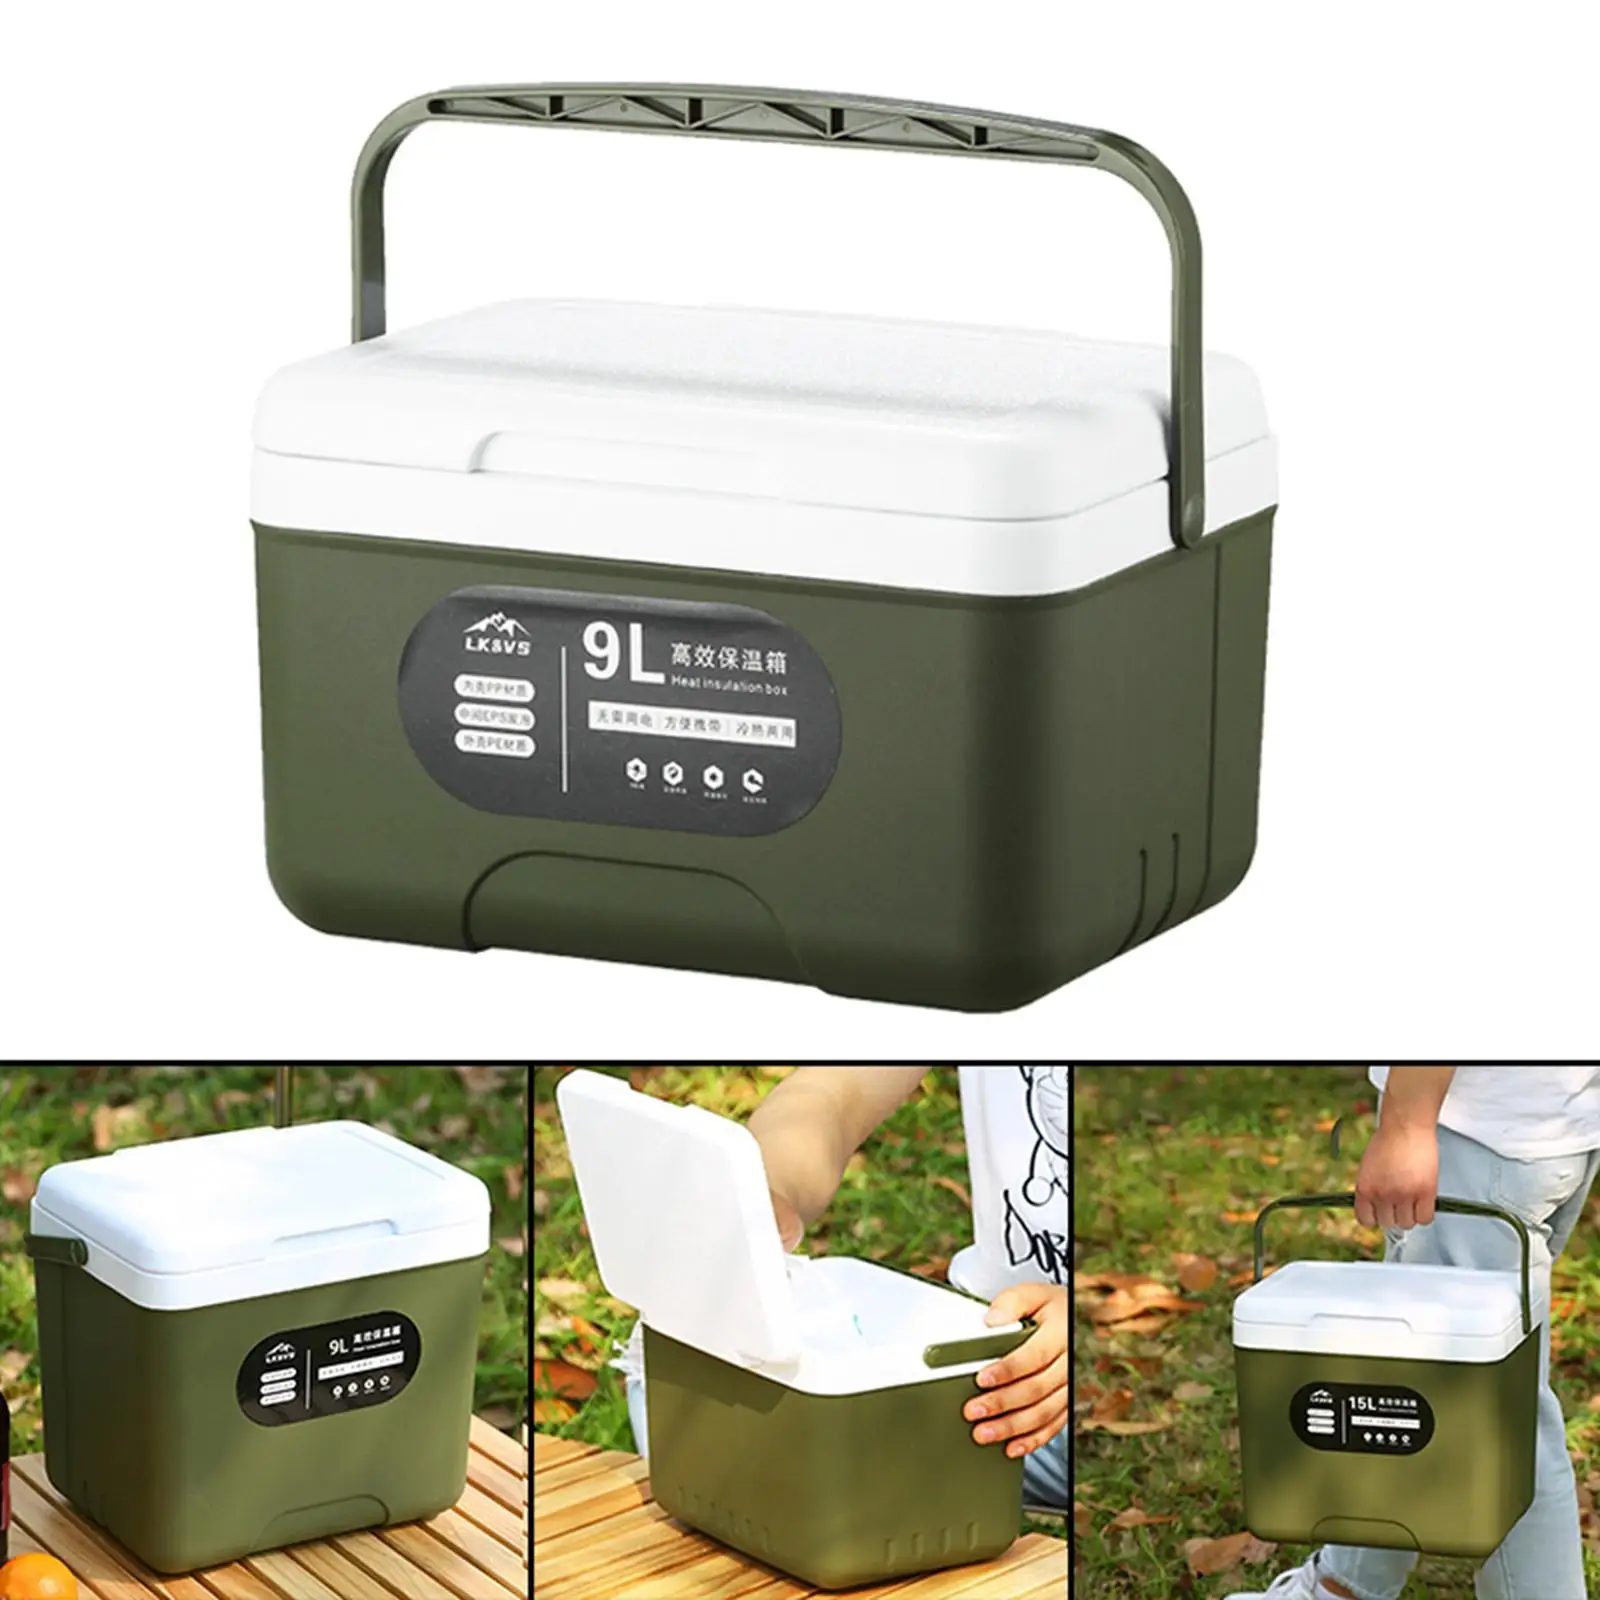 Cooler Bag Outdoor Activities Catering  Refrigerator Storage 9L Insulated  for Car Picnic Lunch Travel RV Shopping